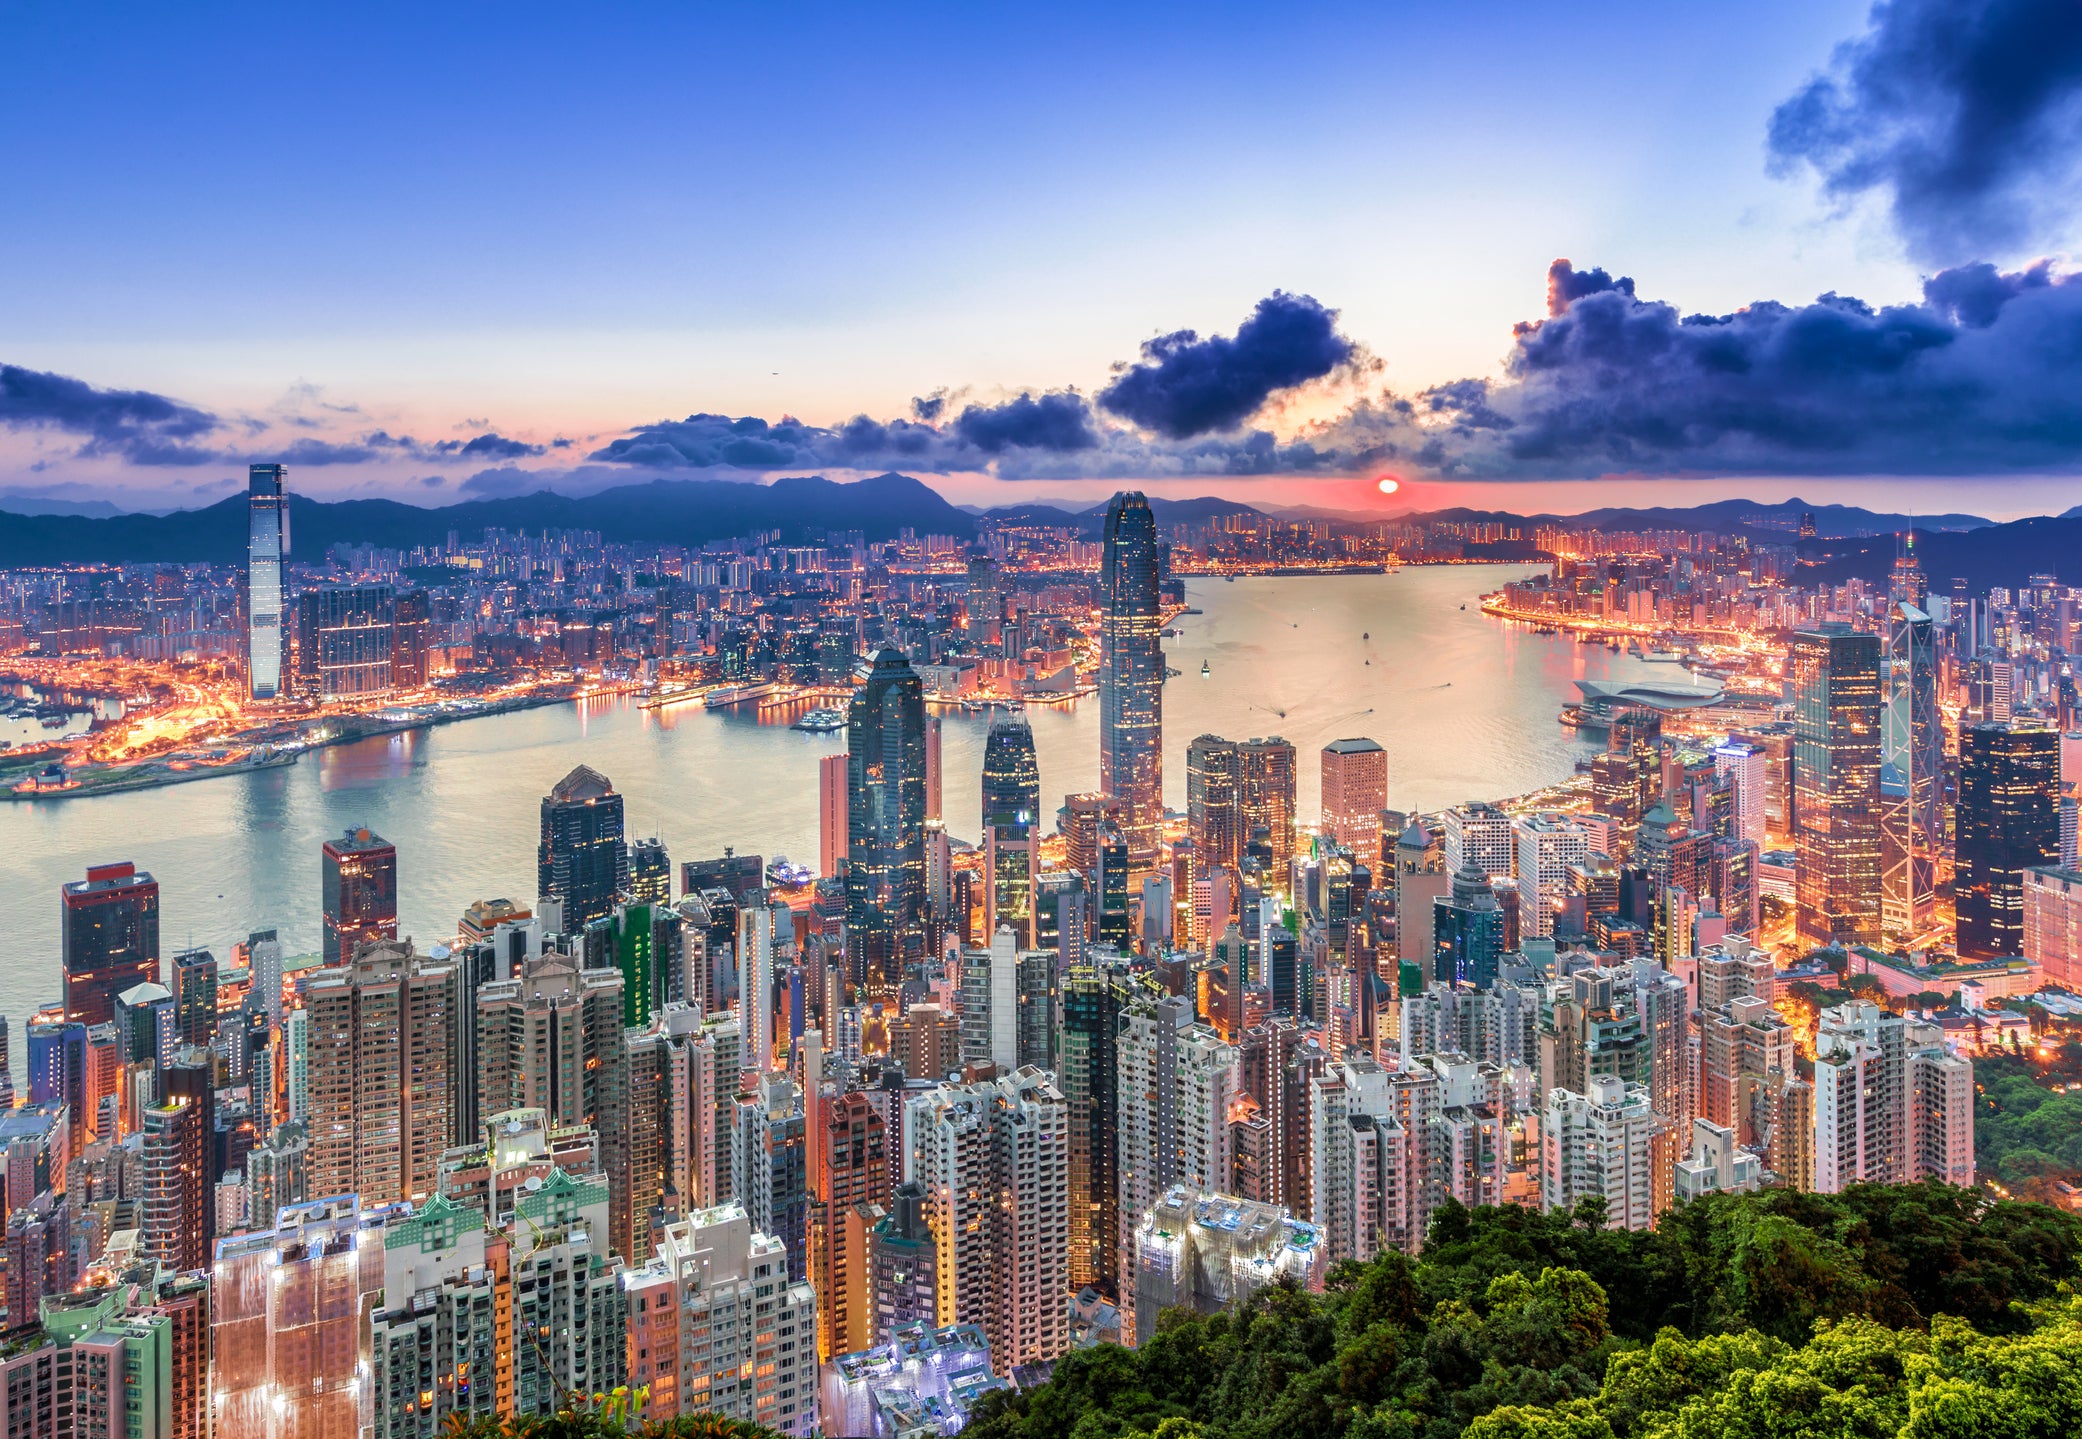 Hong Kong is one of the world's greatest cities